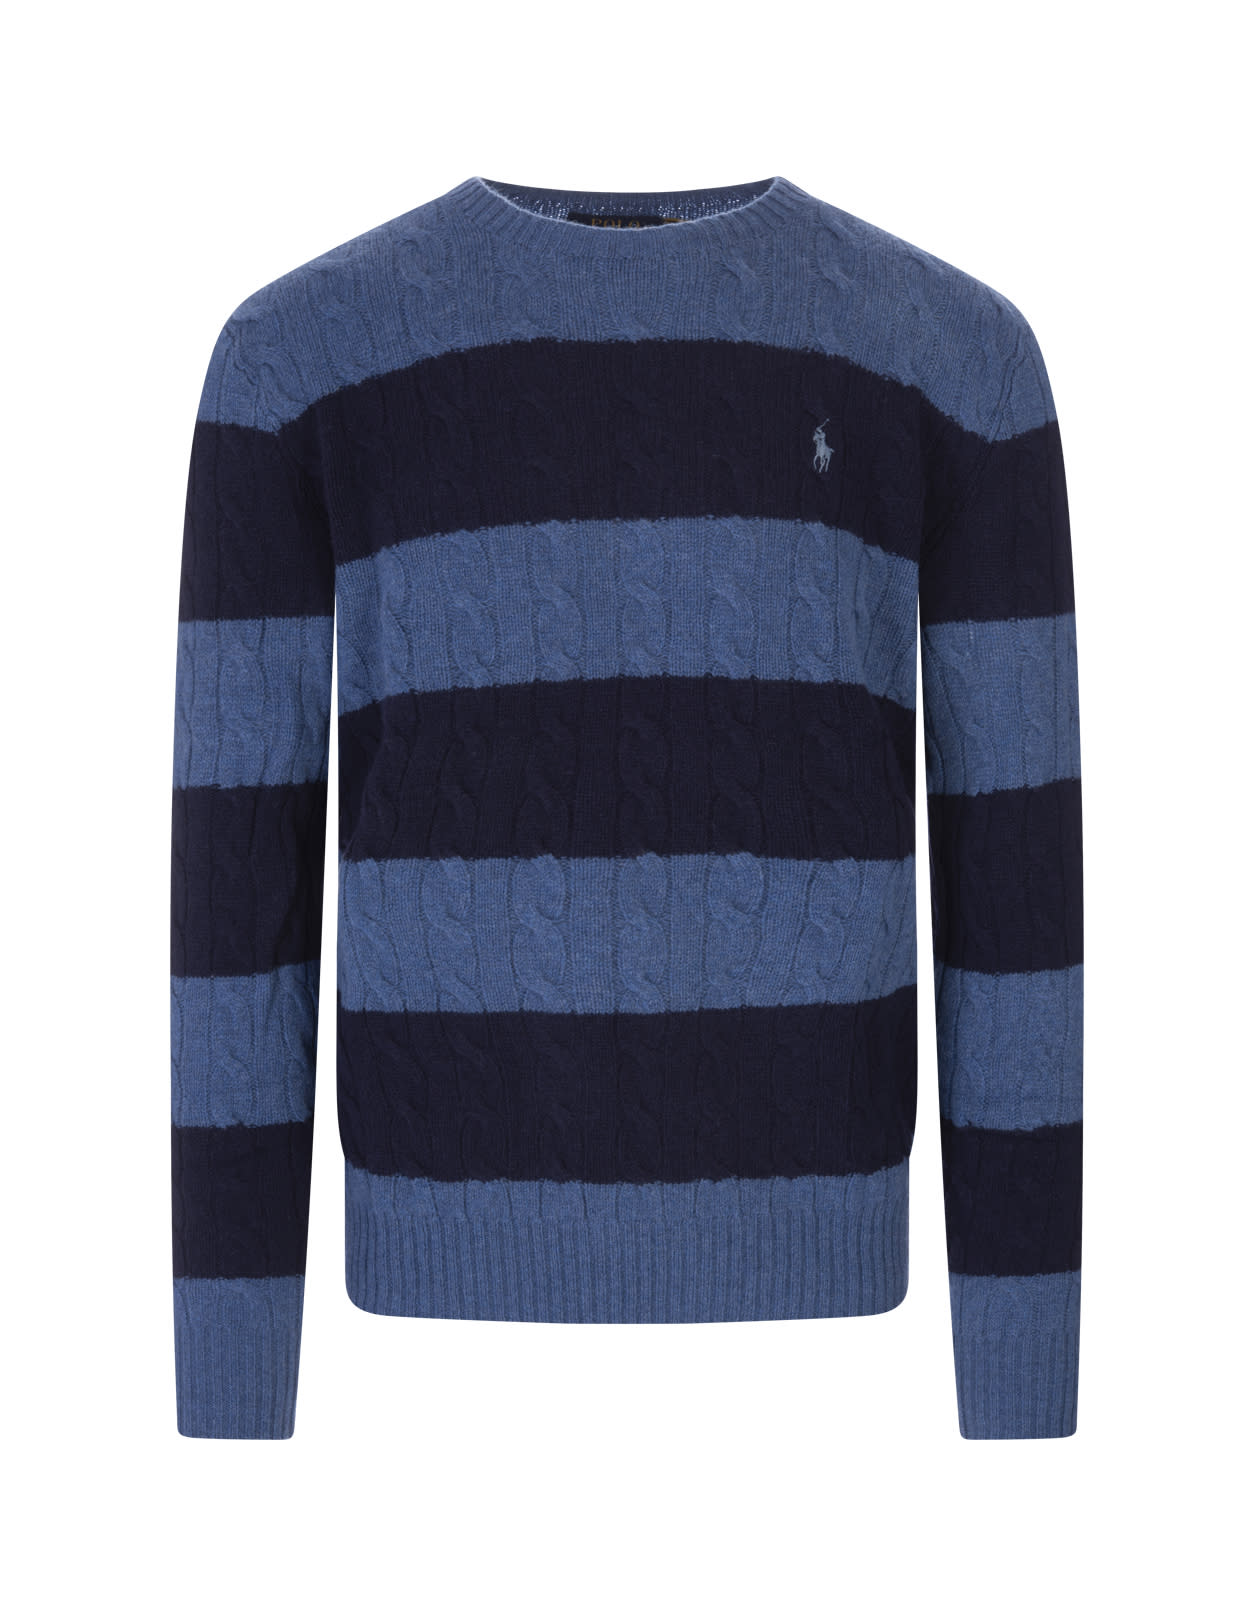 Ralph Lauren Man Navy Blue And Light Blue Braided Sweater With Striped Pattern